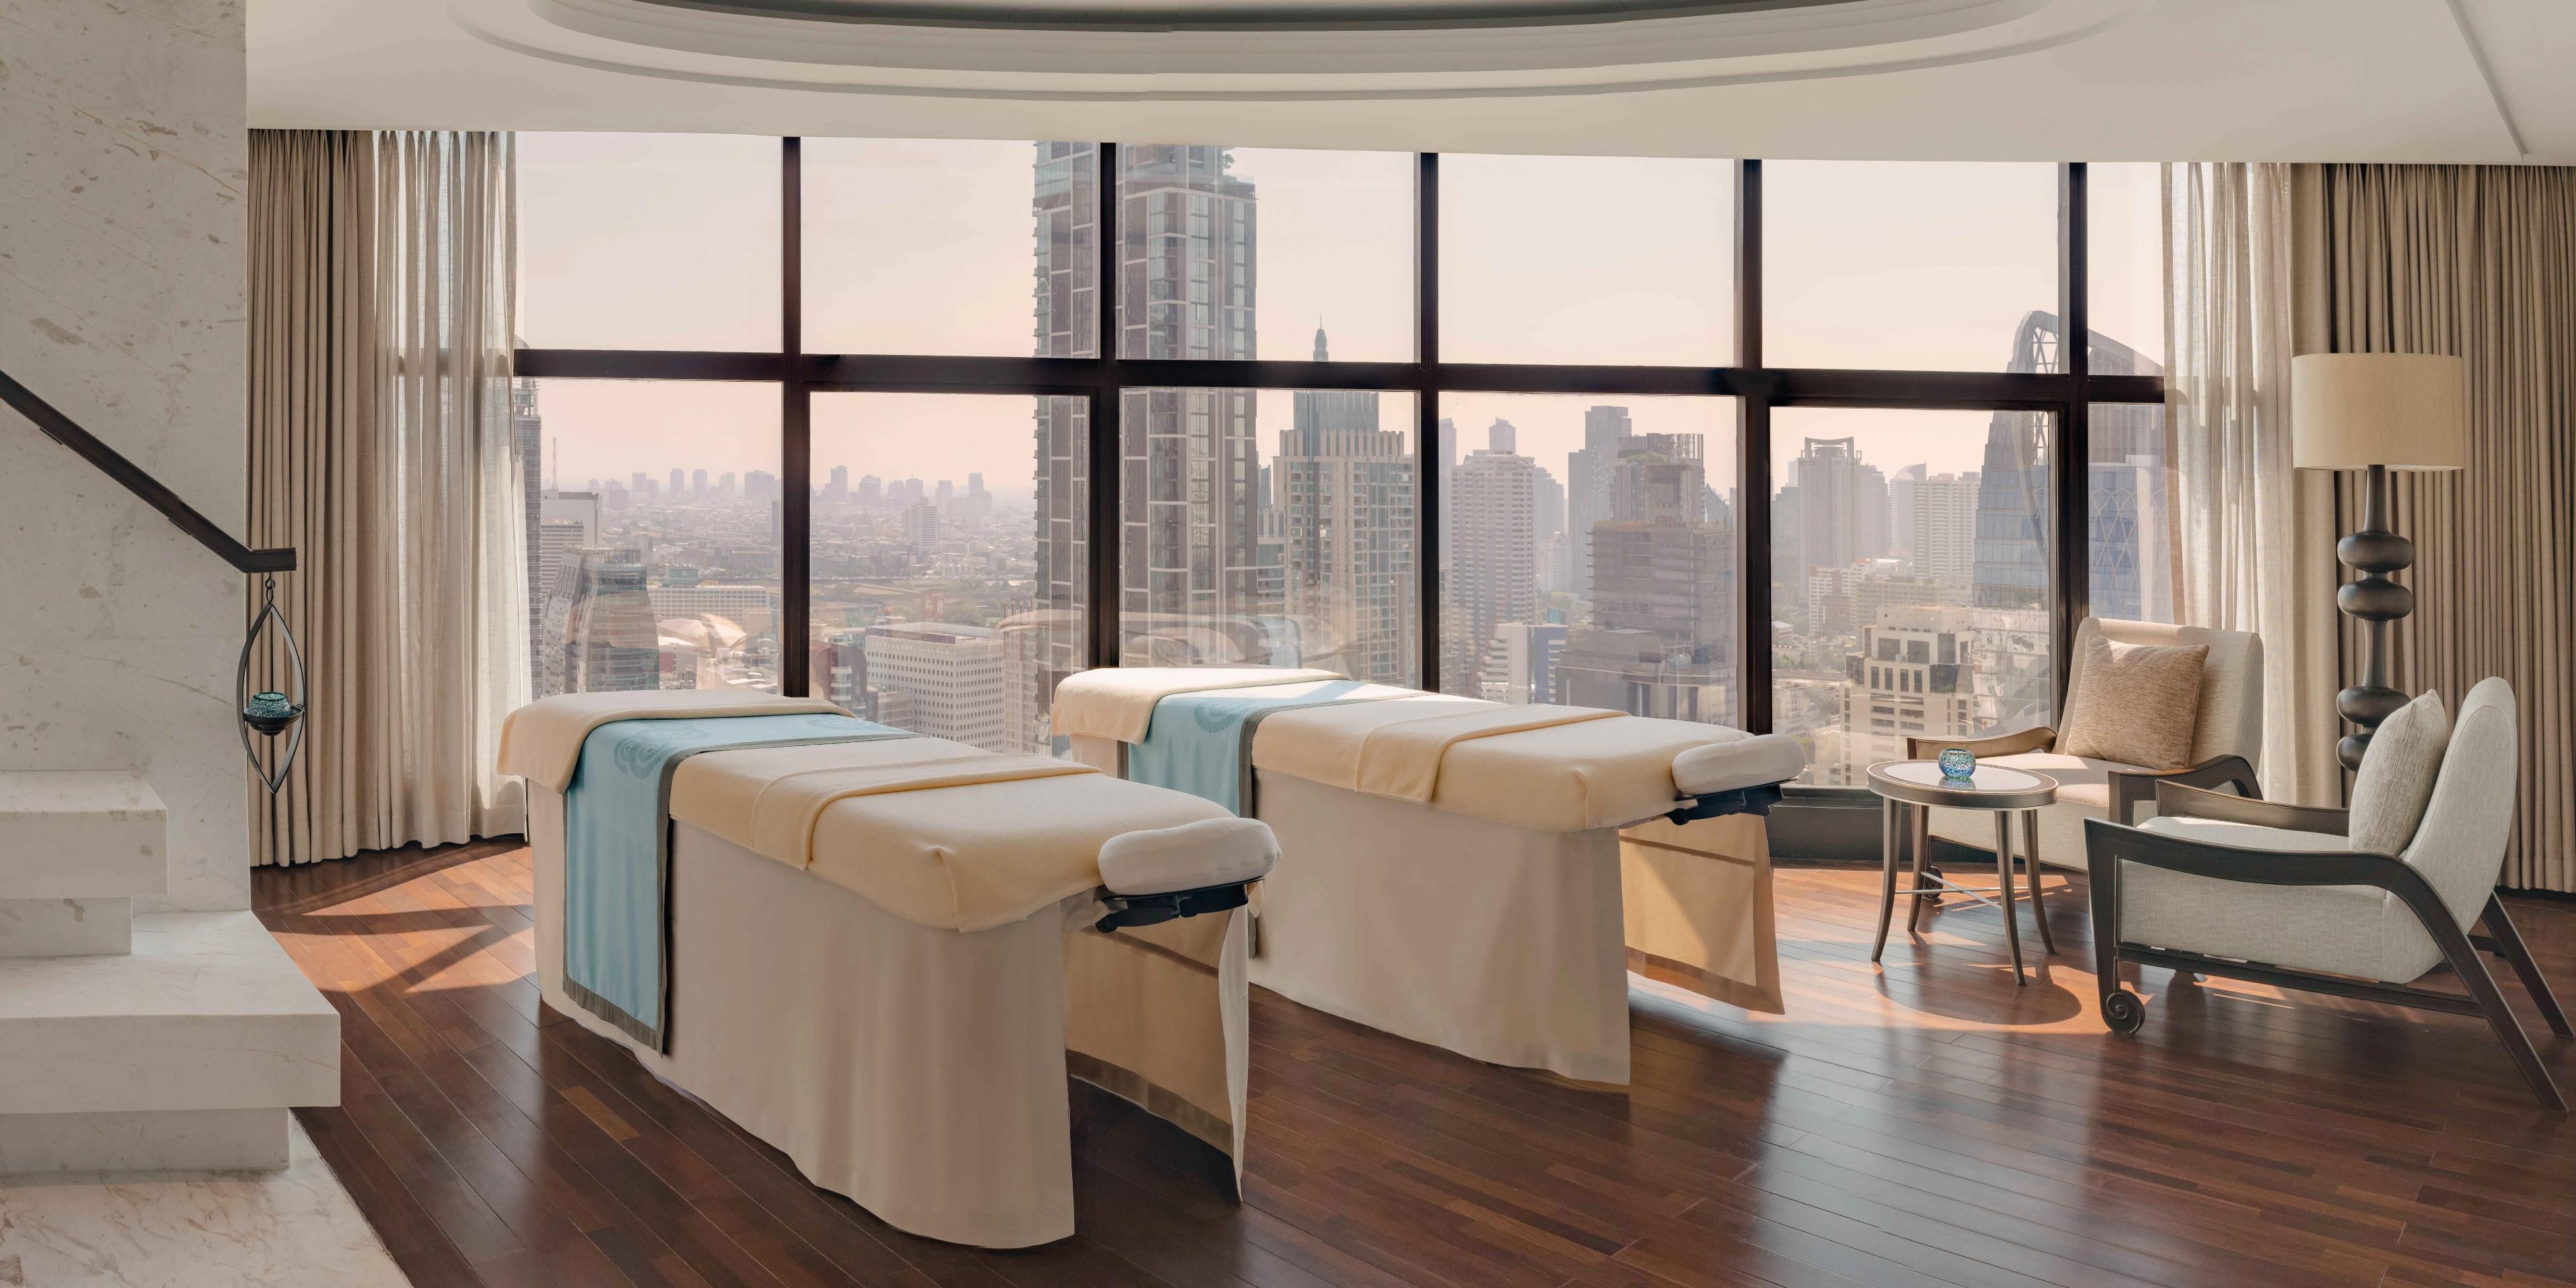 Set high above Bangkok, each of the nine treatment rooms offer stunning views of the city in a sanctuary of calm.  Our renowned SPA InterContinental offers a wide range of massages, skin therapies, baths, signature treatments using HARNN and Elemis products.